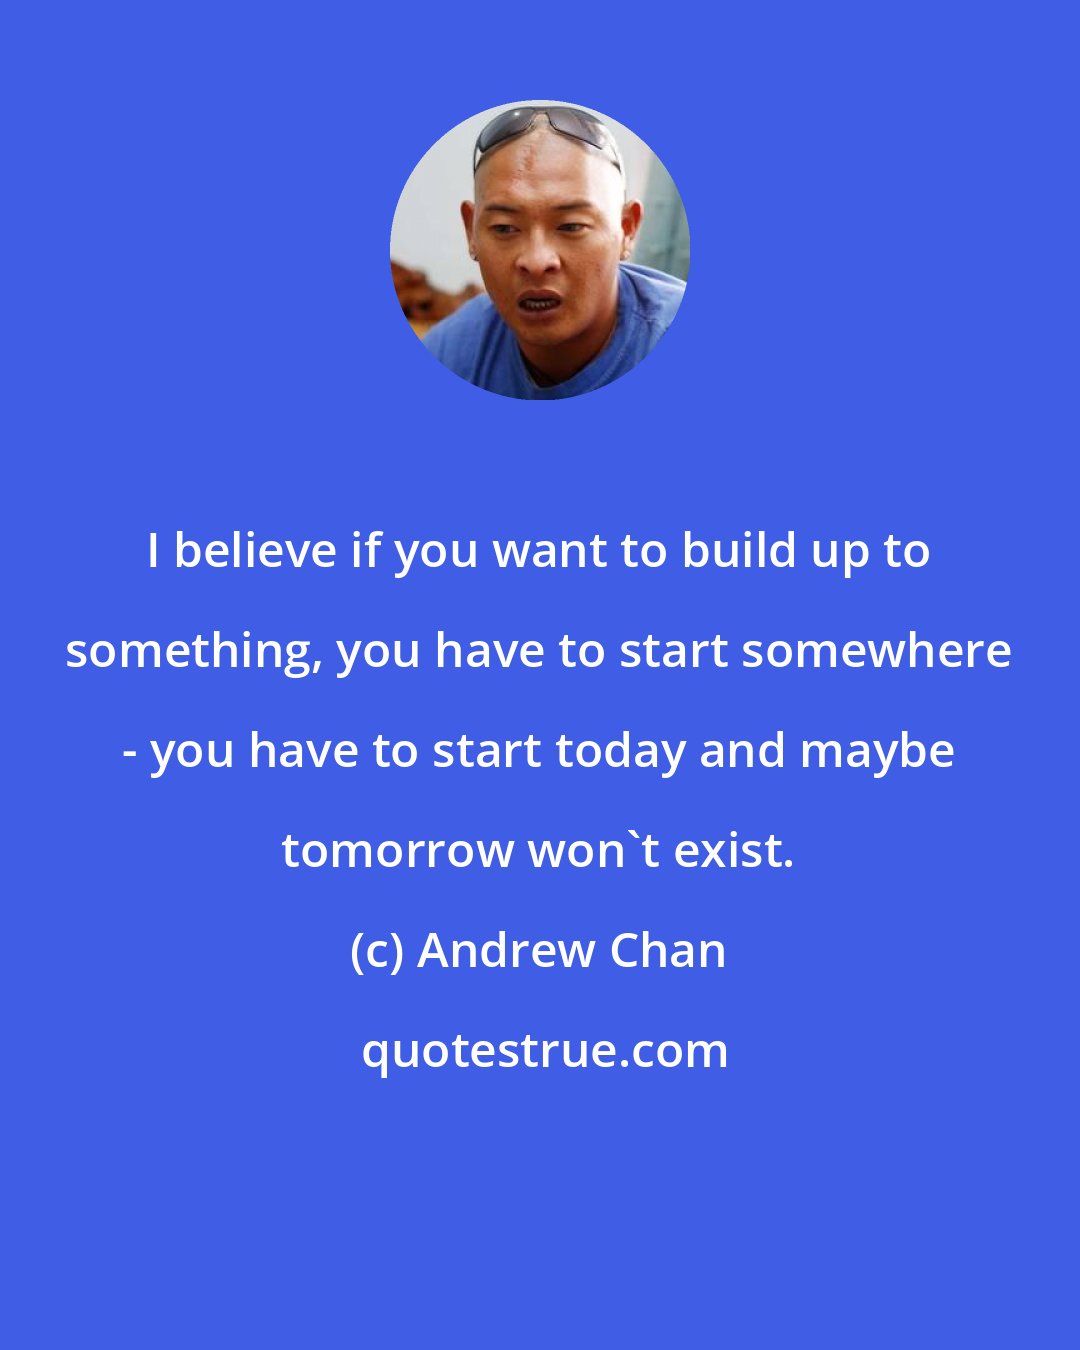 Andrew Chan: I believe if you want to build up to something, you have to start somewhere - you have to start today and maybe tomorrow won't exist.